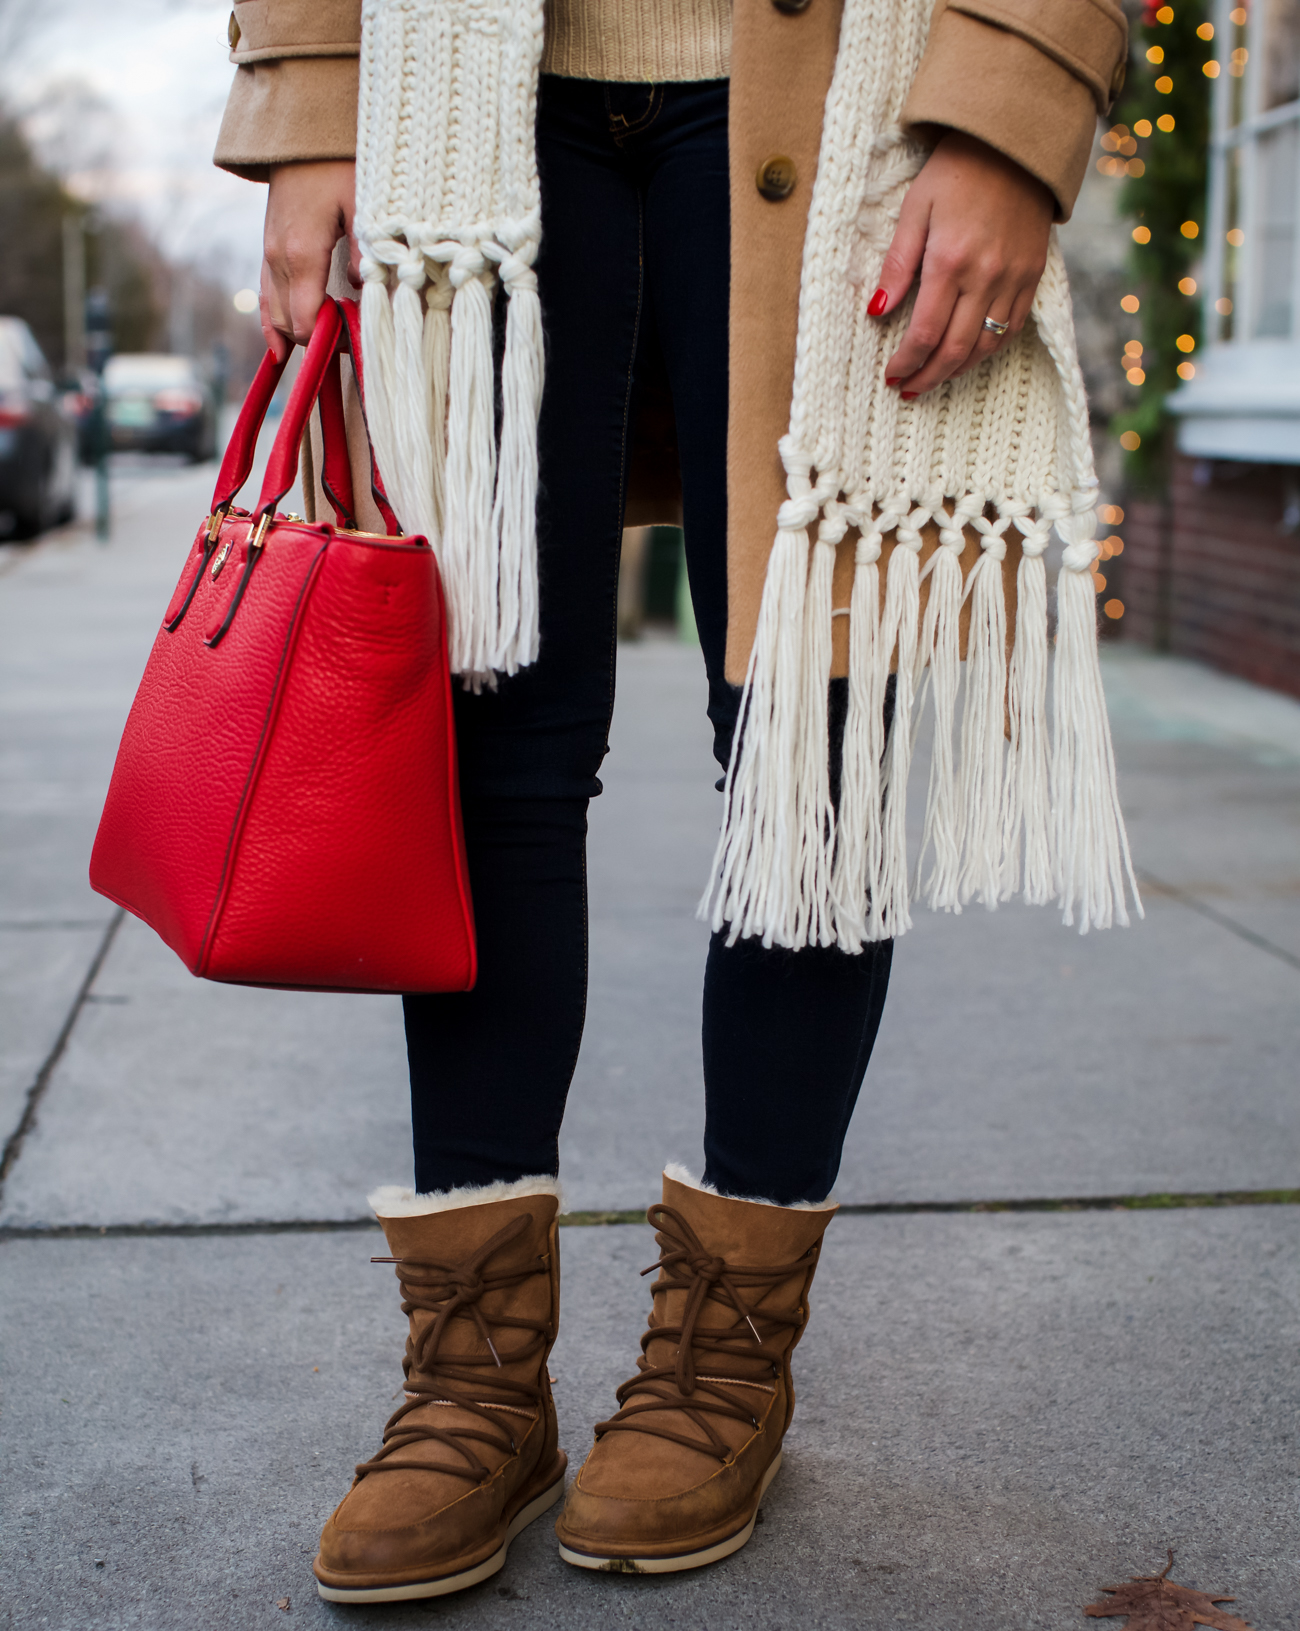 Loft Coat in tan with Nordstrom Topshop Knit Scarf with Ugg Lace Up Boots  Waterproof and Tory Burch Robinson Square Tote in Red-12 - SHOP DANDY | A  florida based style and